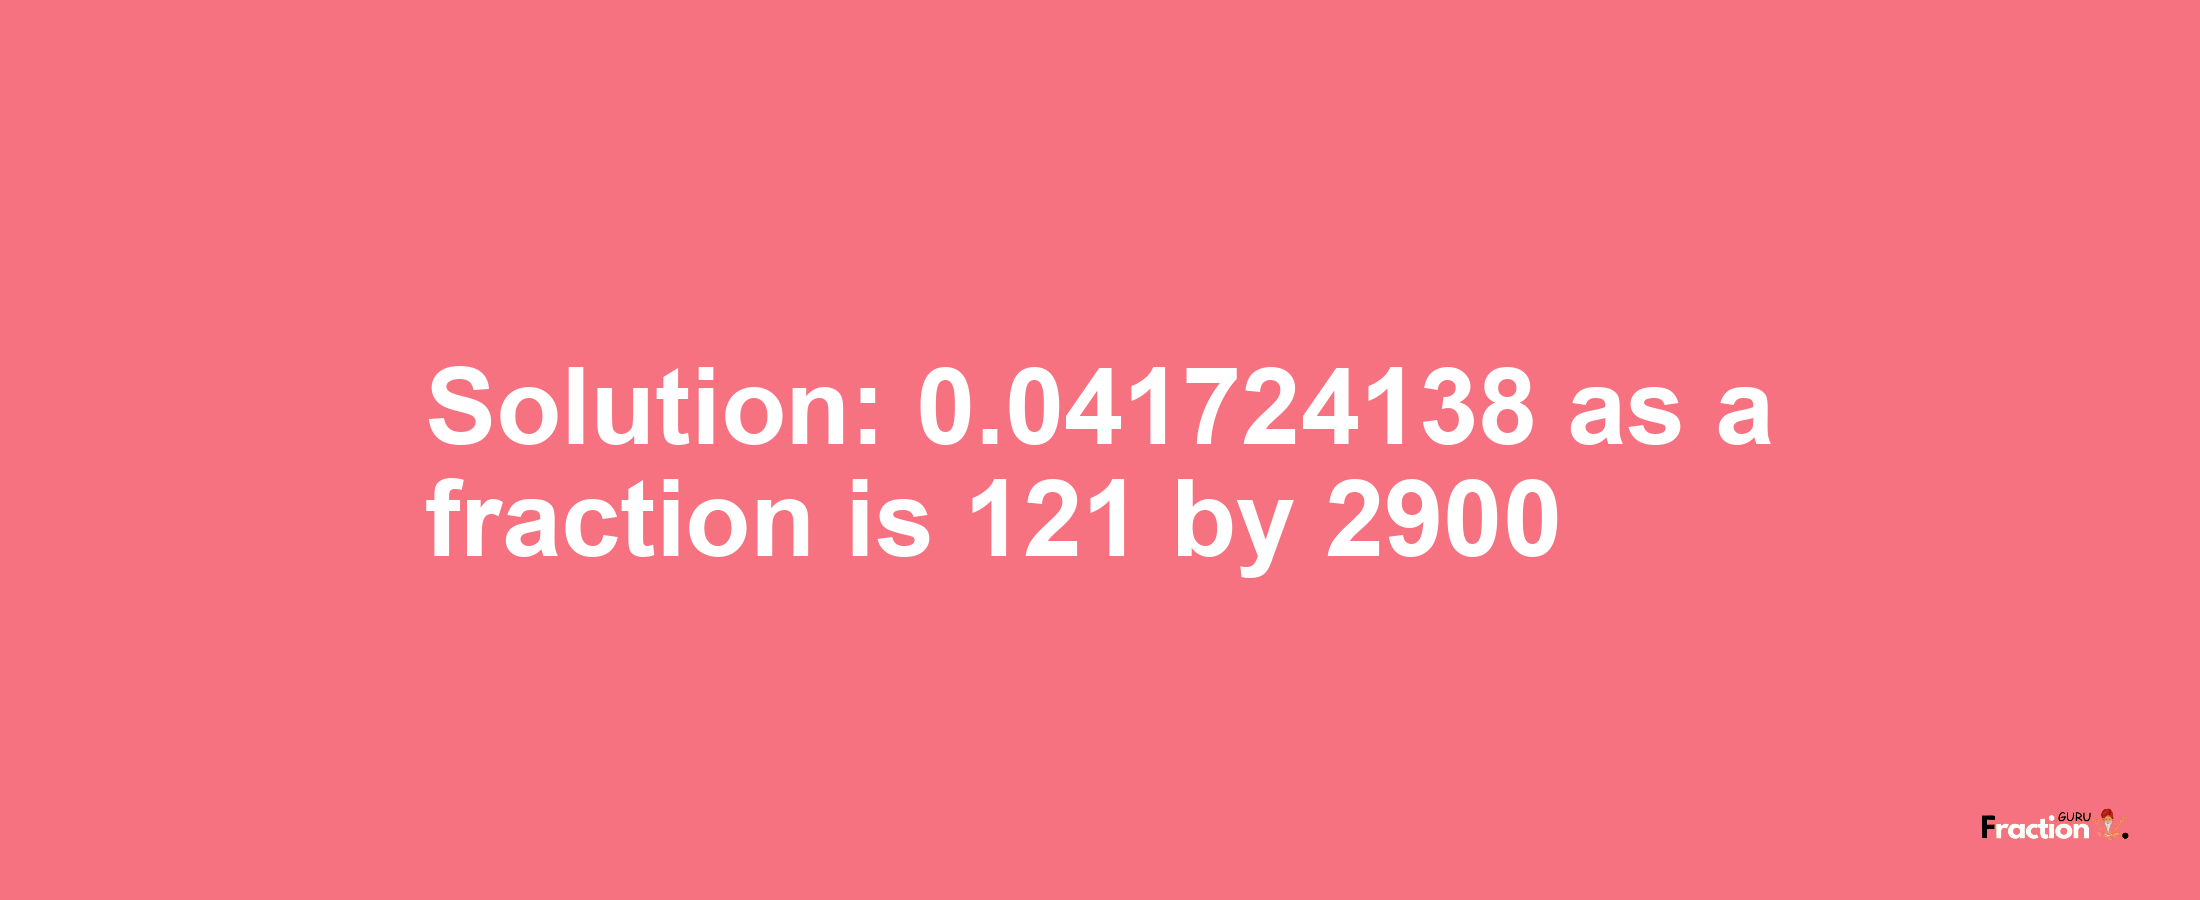 Solution:0.041724138 as a fraction is 121/2900